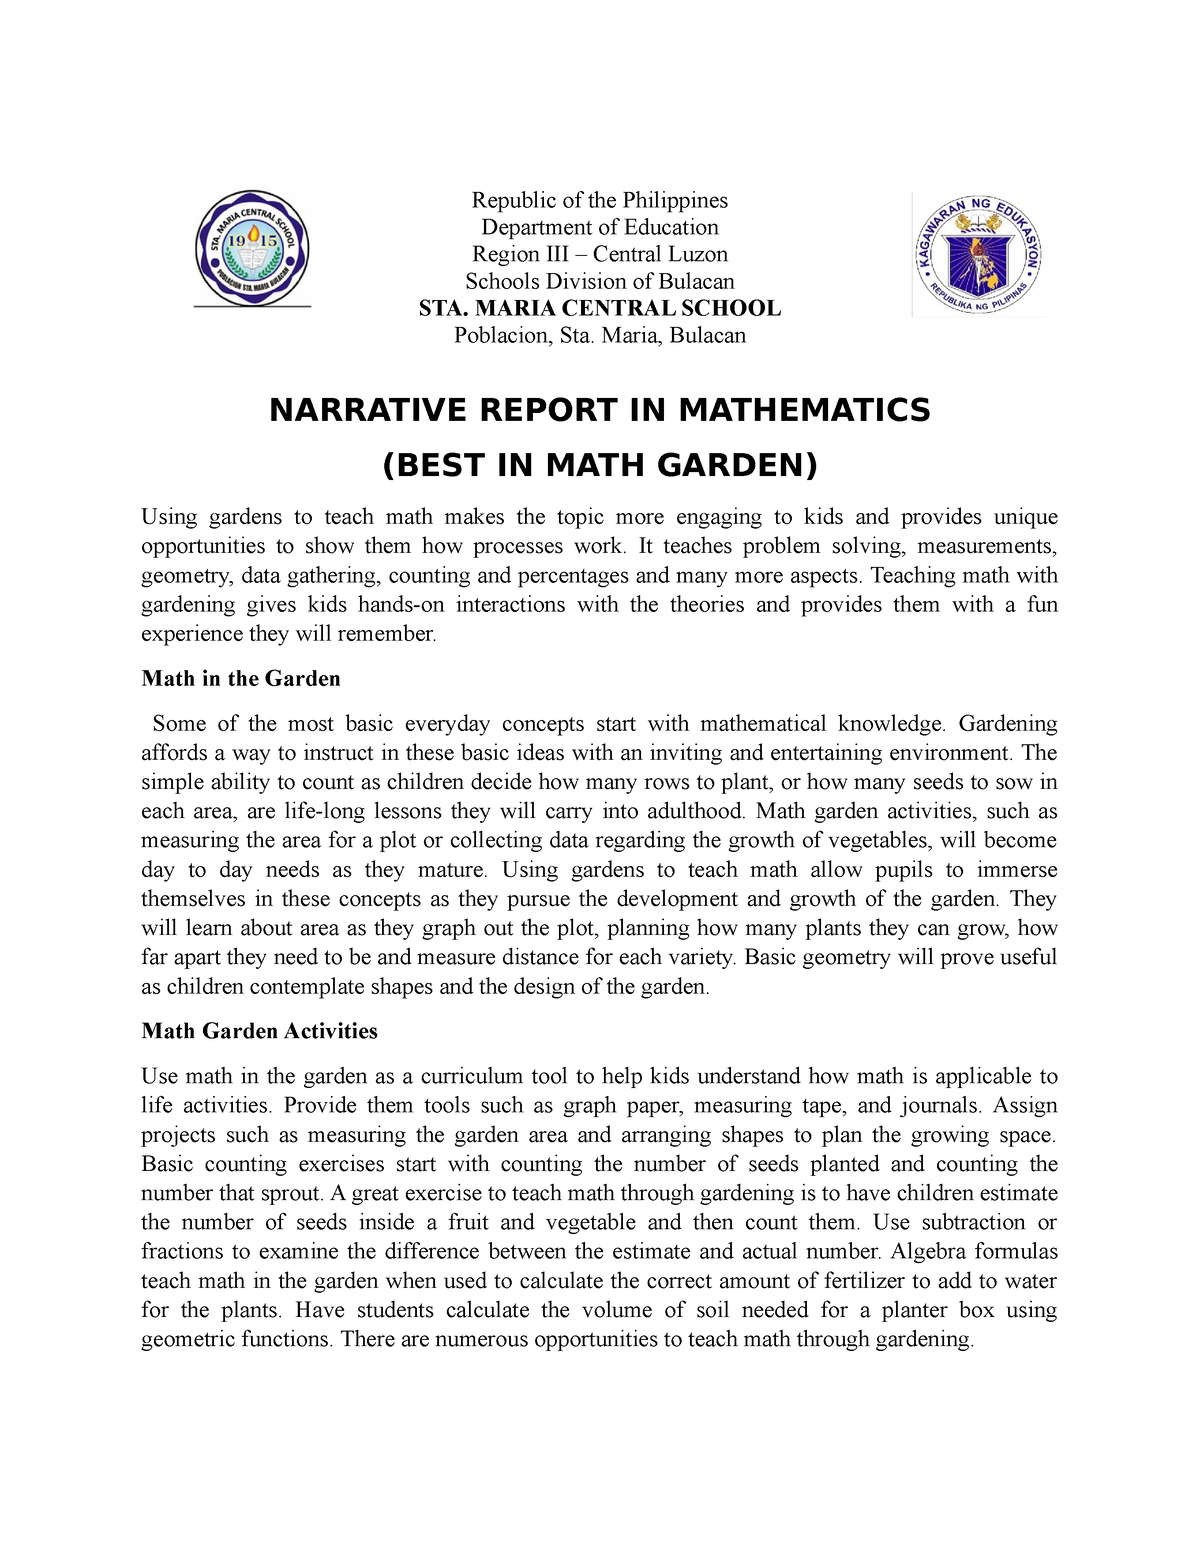 example of narrative report research in the philippines